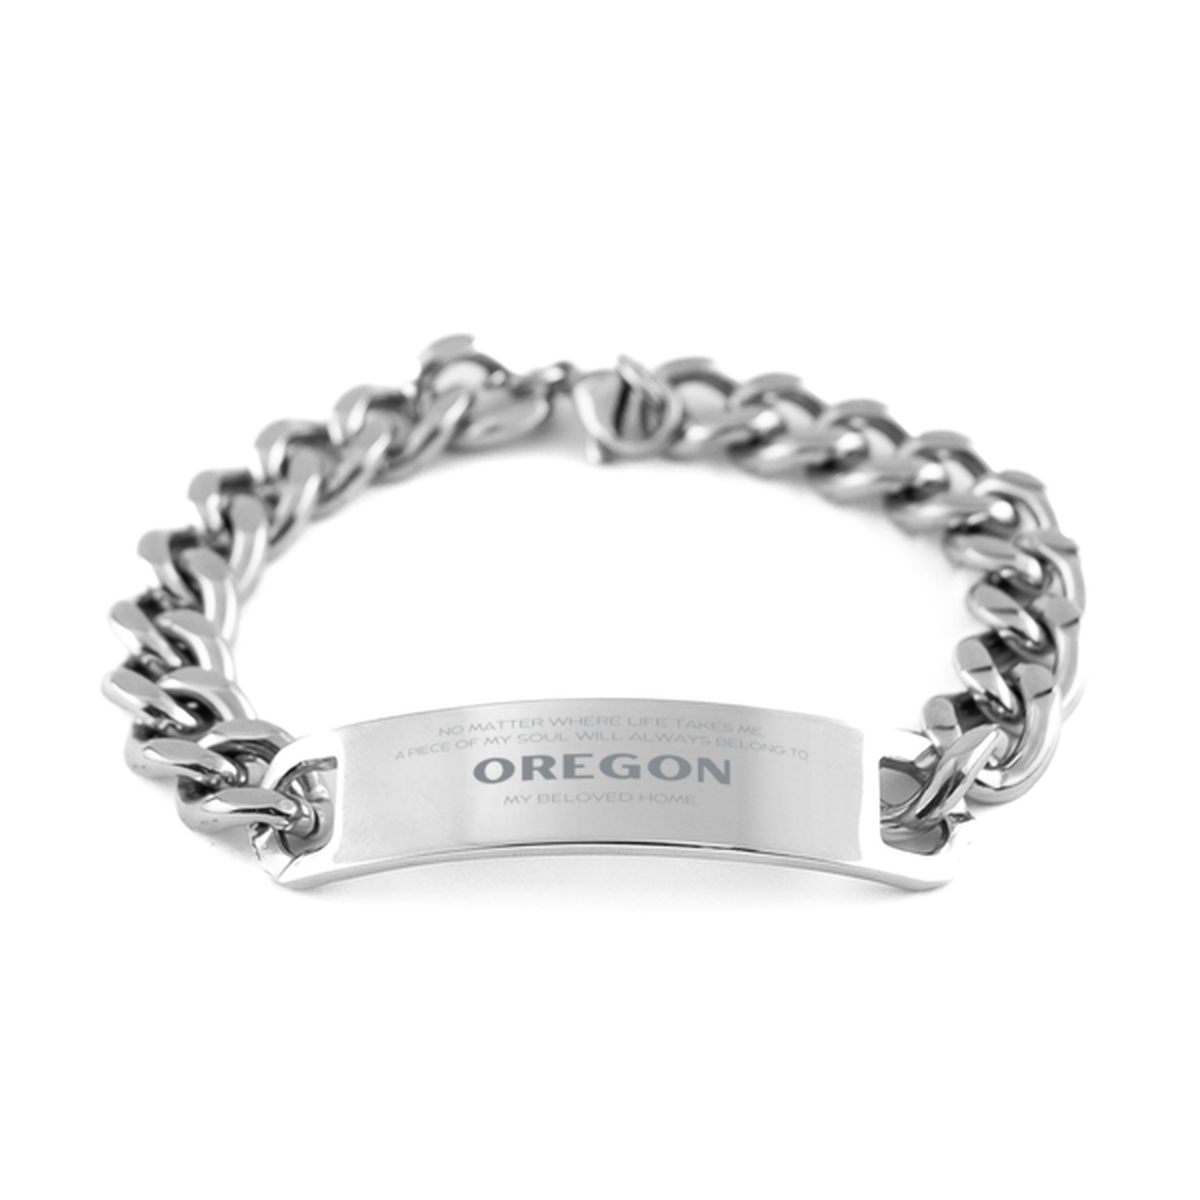 Love Oregon State Gifts, My soul will always belong to Oregon, Proud Cuban Chain Stainless Steel Bracelet, Birthday Unique Gifts For Oregon Men, Women, Friends